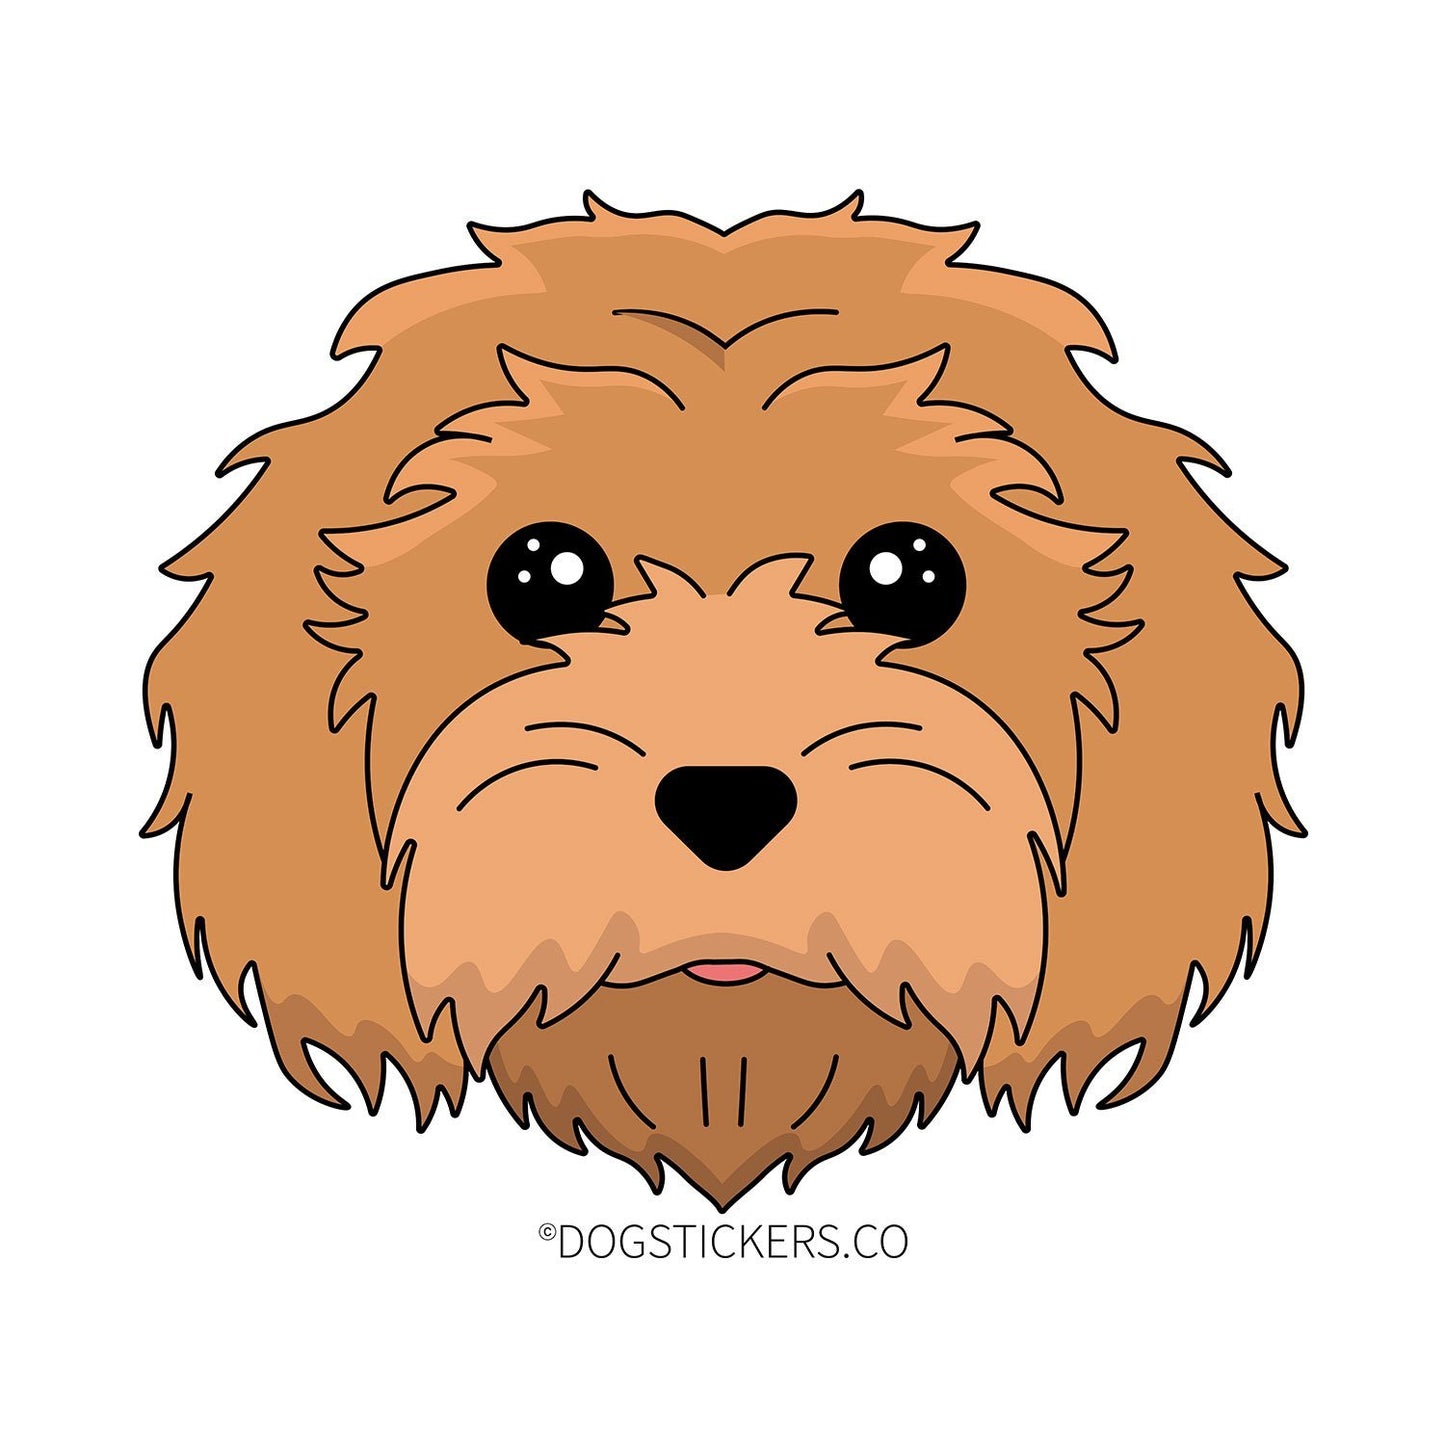 Goldendoodle Sticker - Dogstickers.co